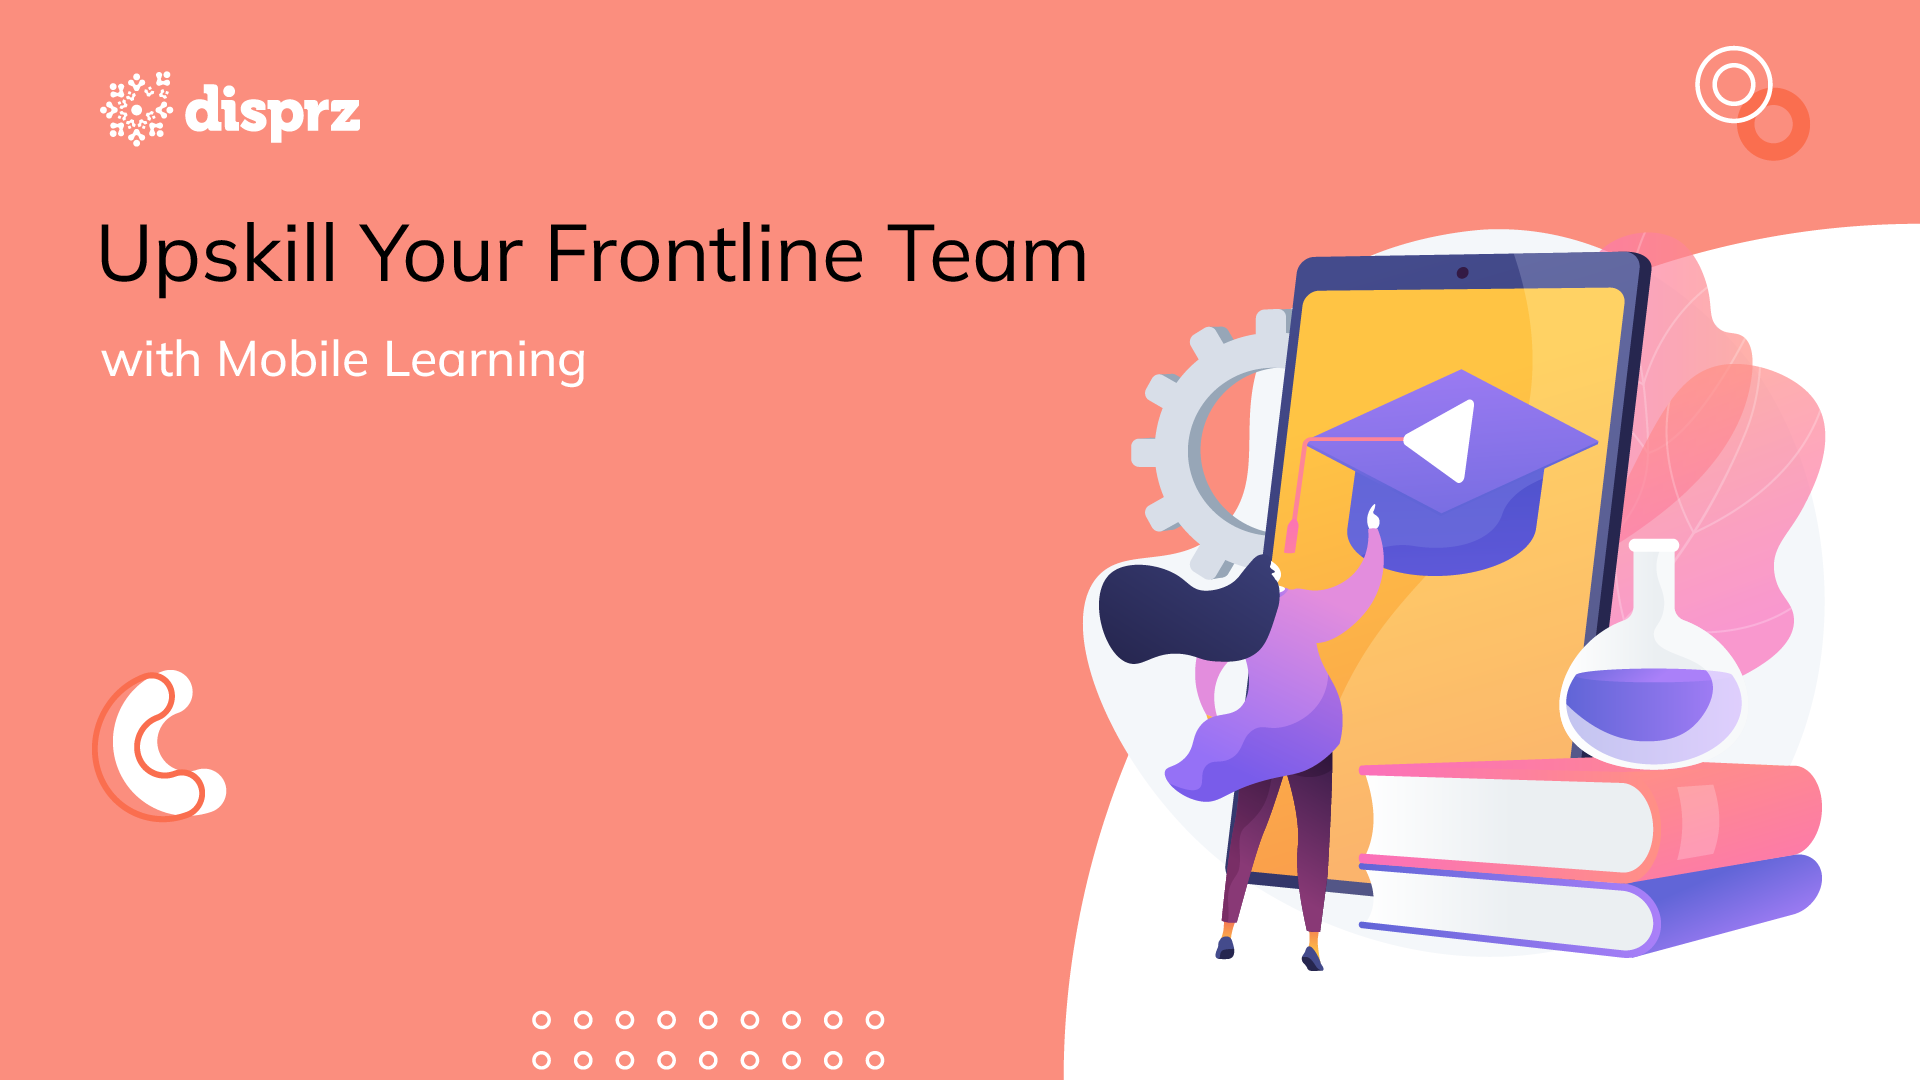 Upskill Your Frontline Team with Mobile Learning